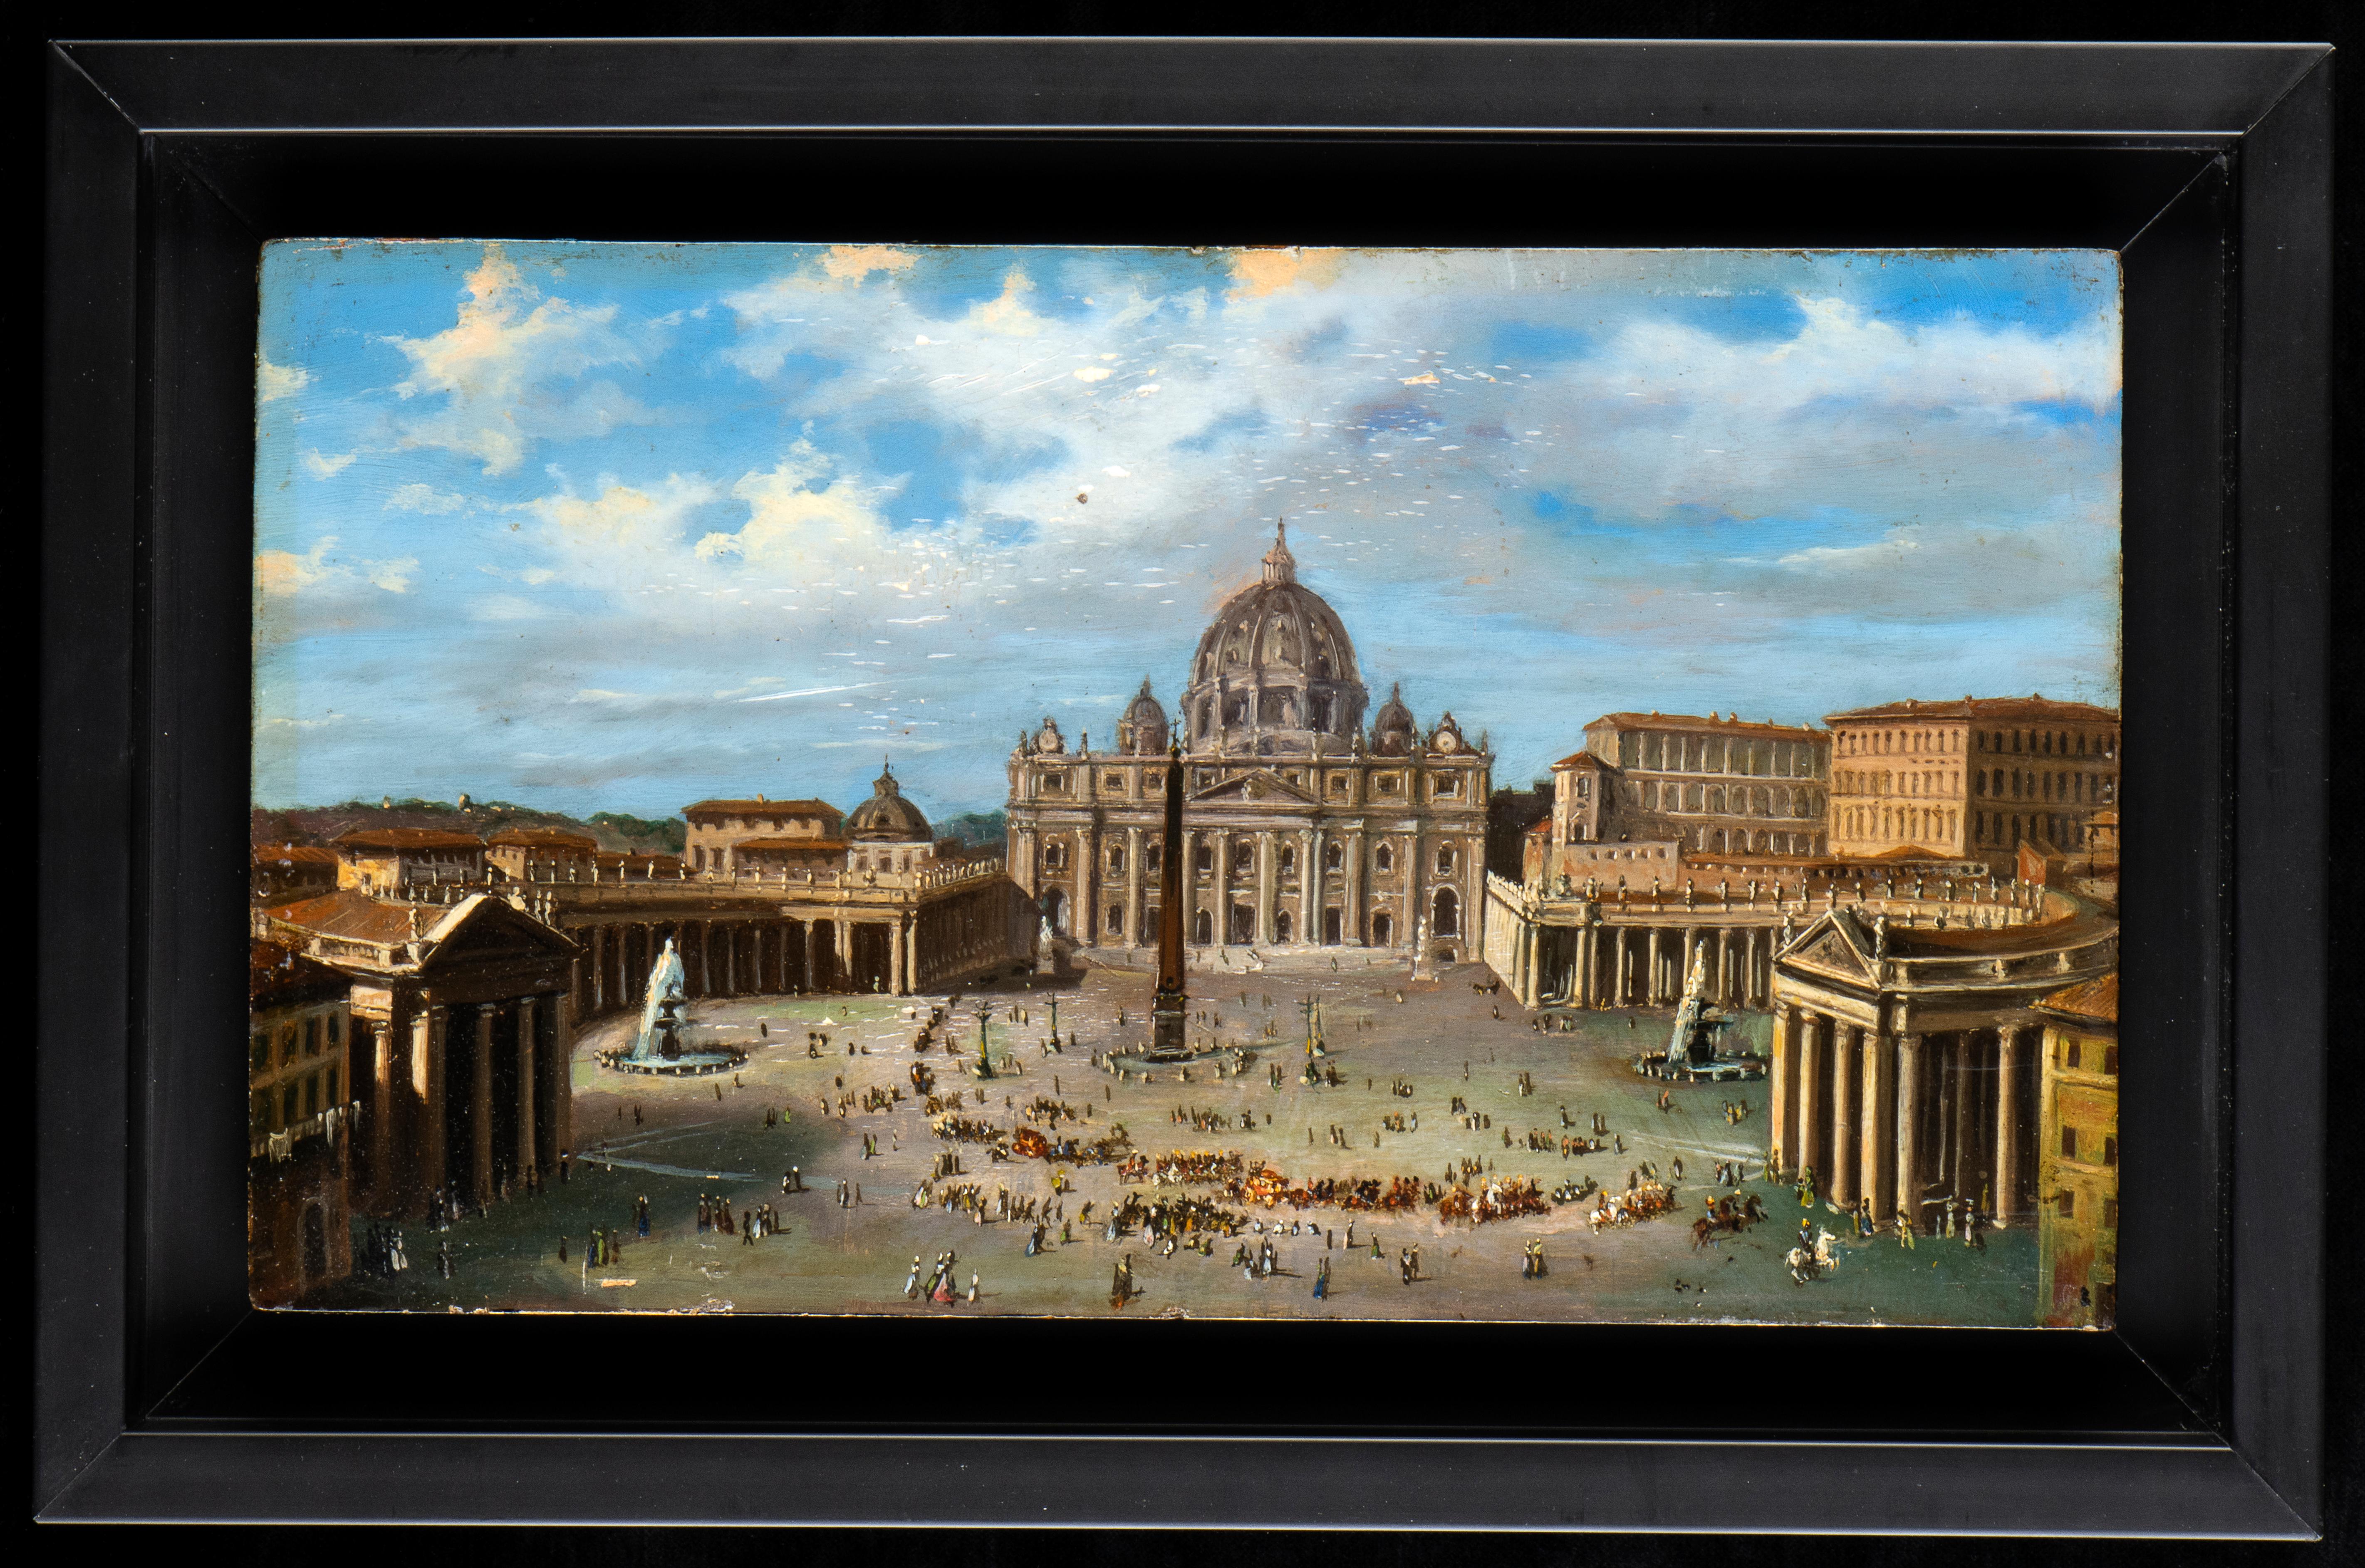 Unknown Figurative Painting - Oil Paint View Of St. Peter's Basilica With The Square and Colonnade and Obelisk